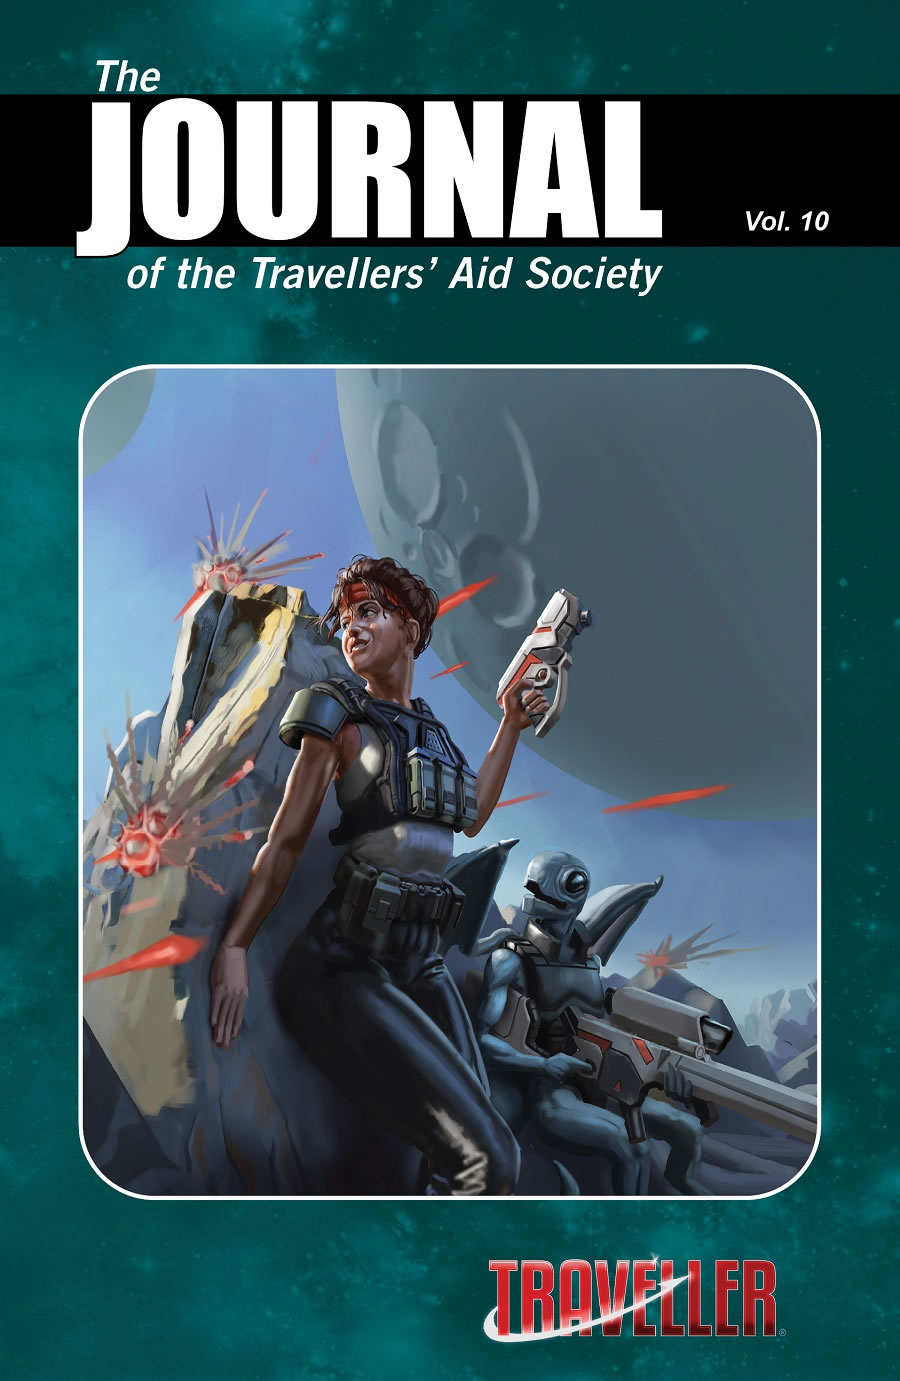 The Journal of Travellers Aid Society Vol.10 